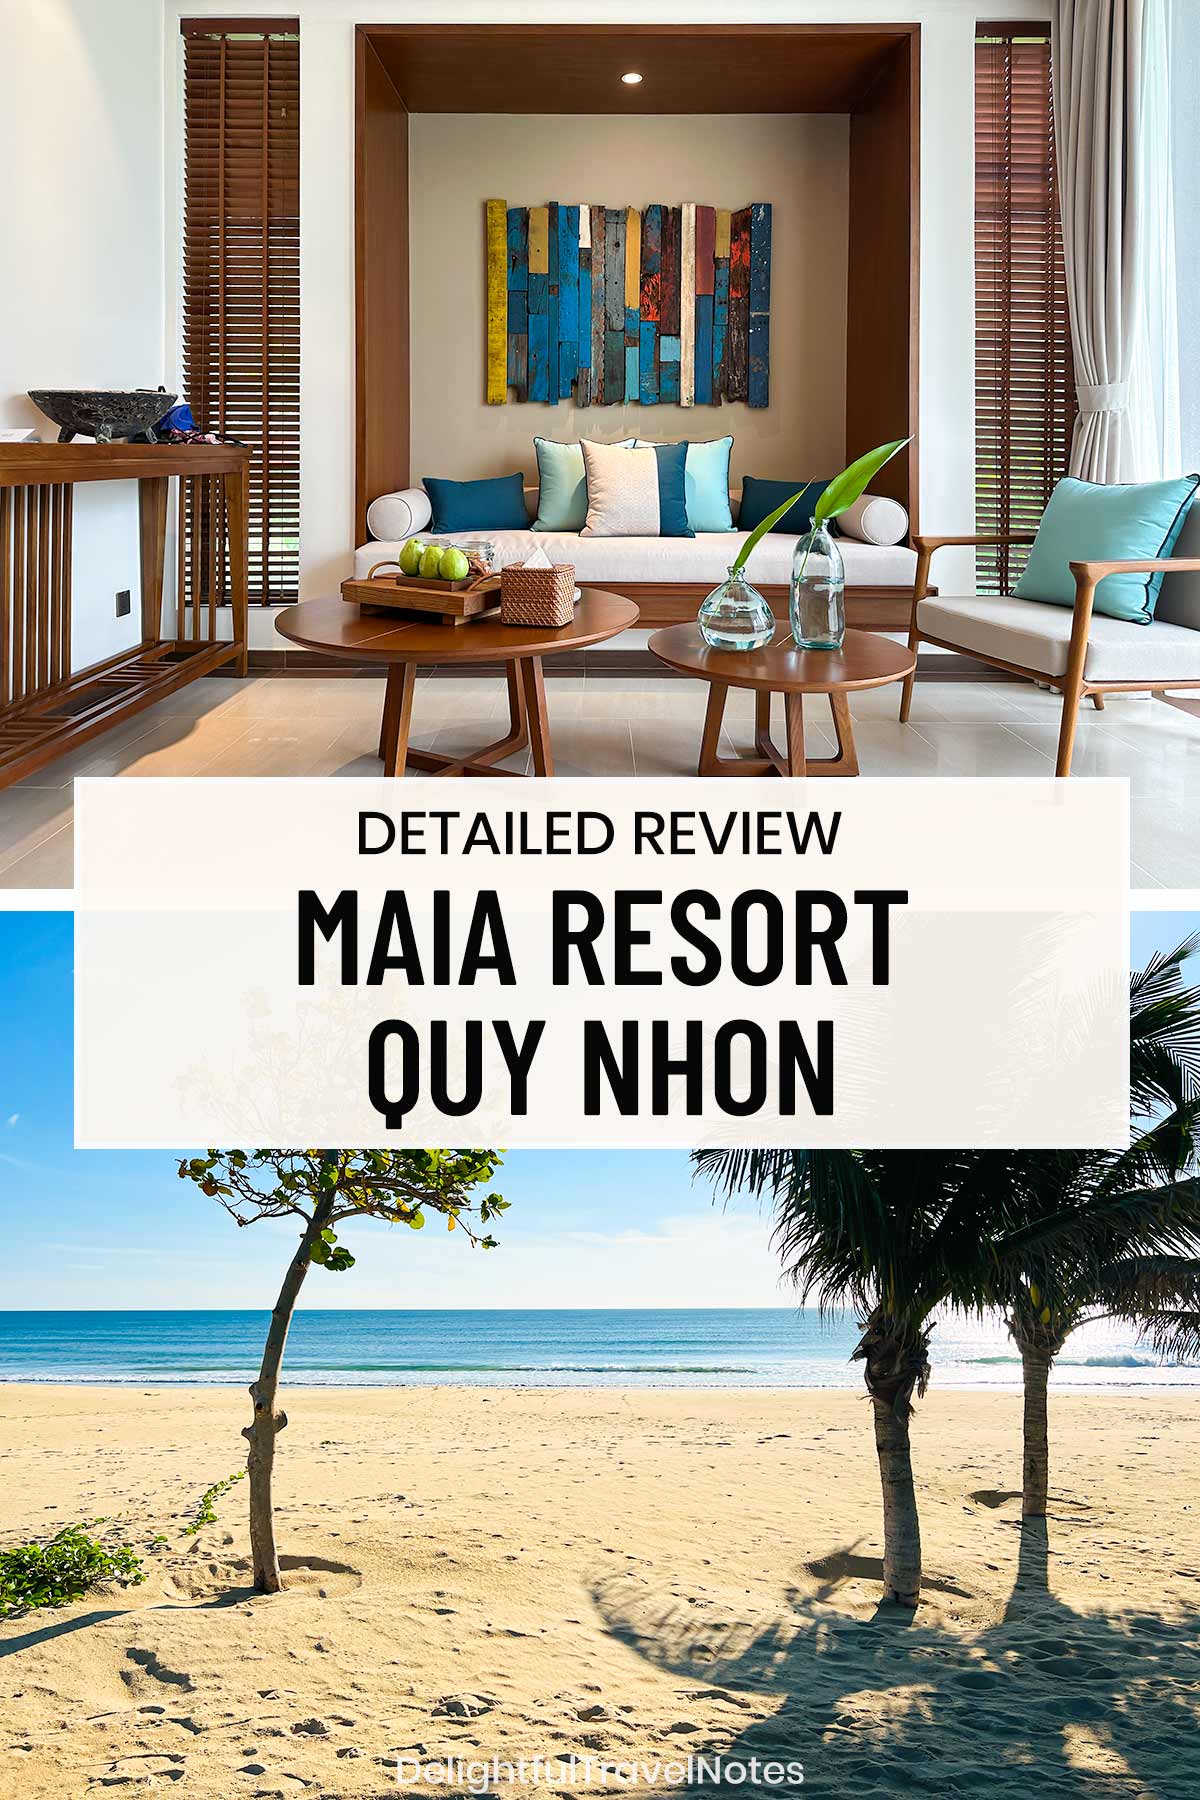 a collage of resort facilities for the review of Maia Resort Quy Nhon.